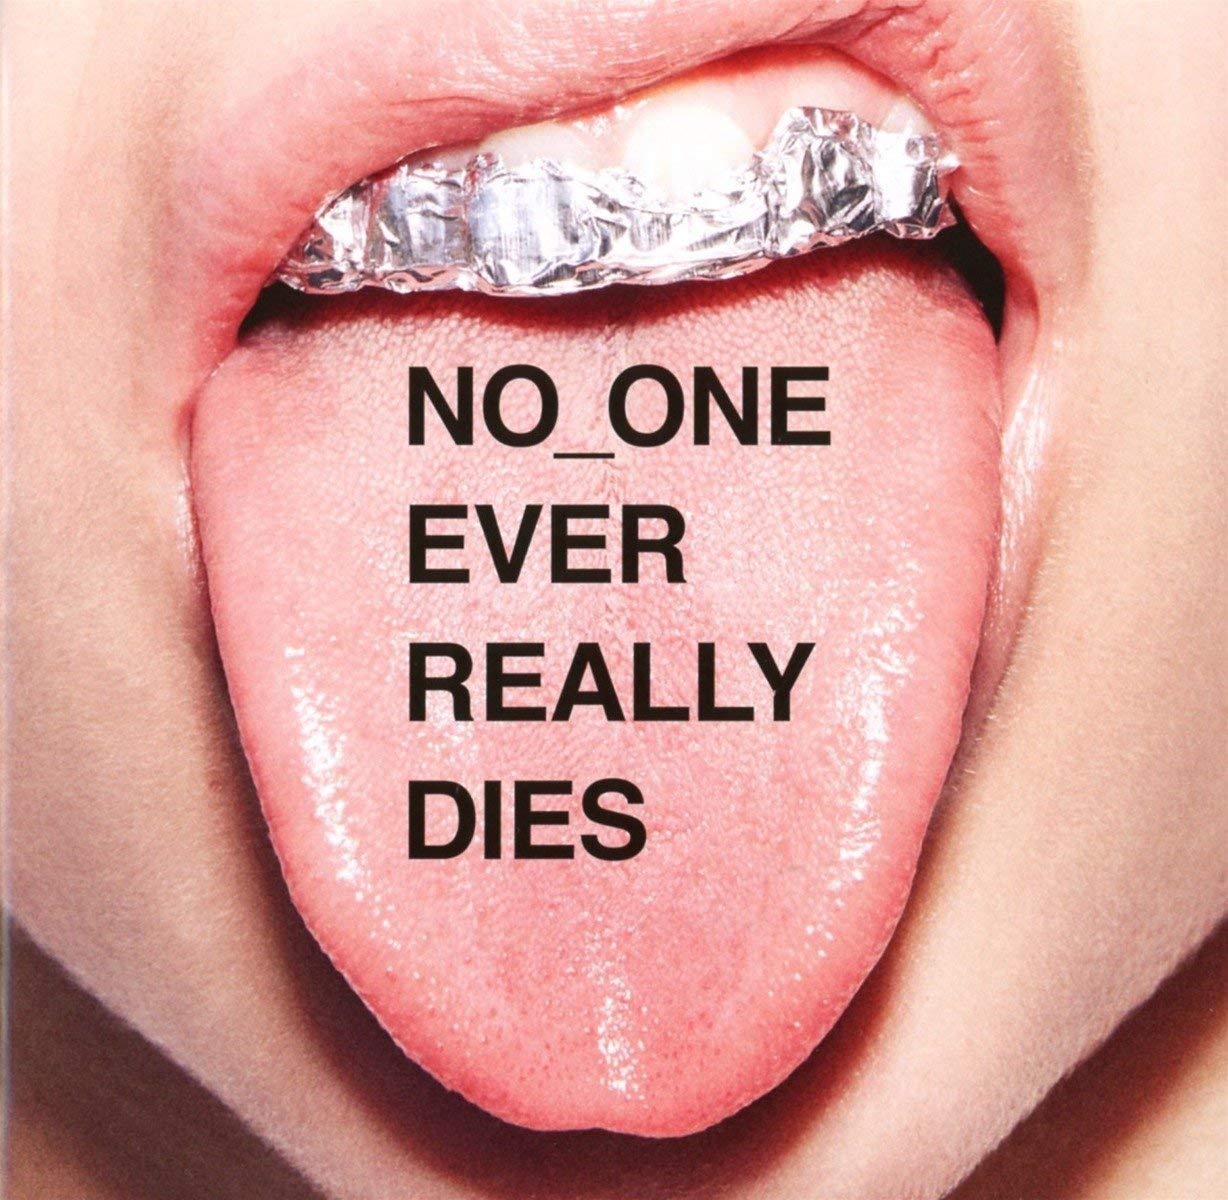 「Lemon」収録アルバム『No_One Ever Really Dies』／N.E.R.D and Rihanna